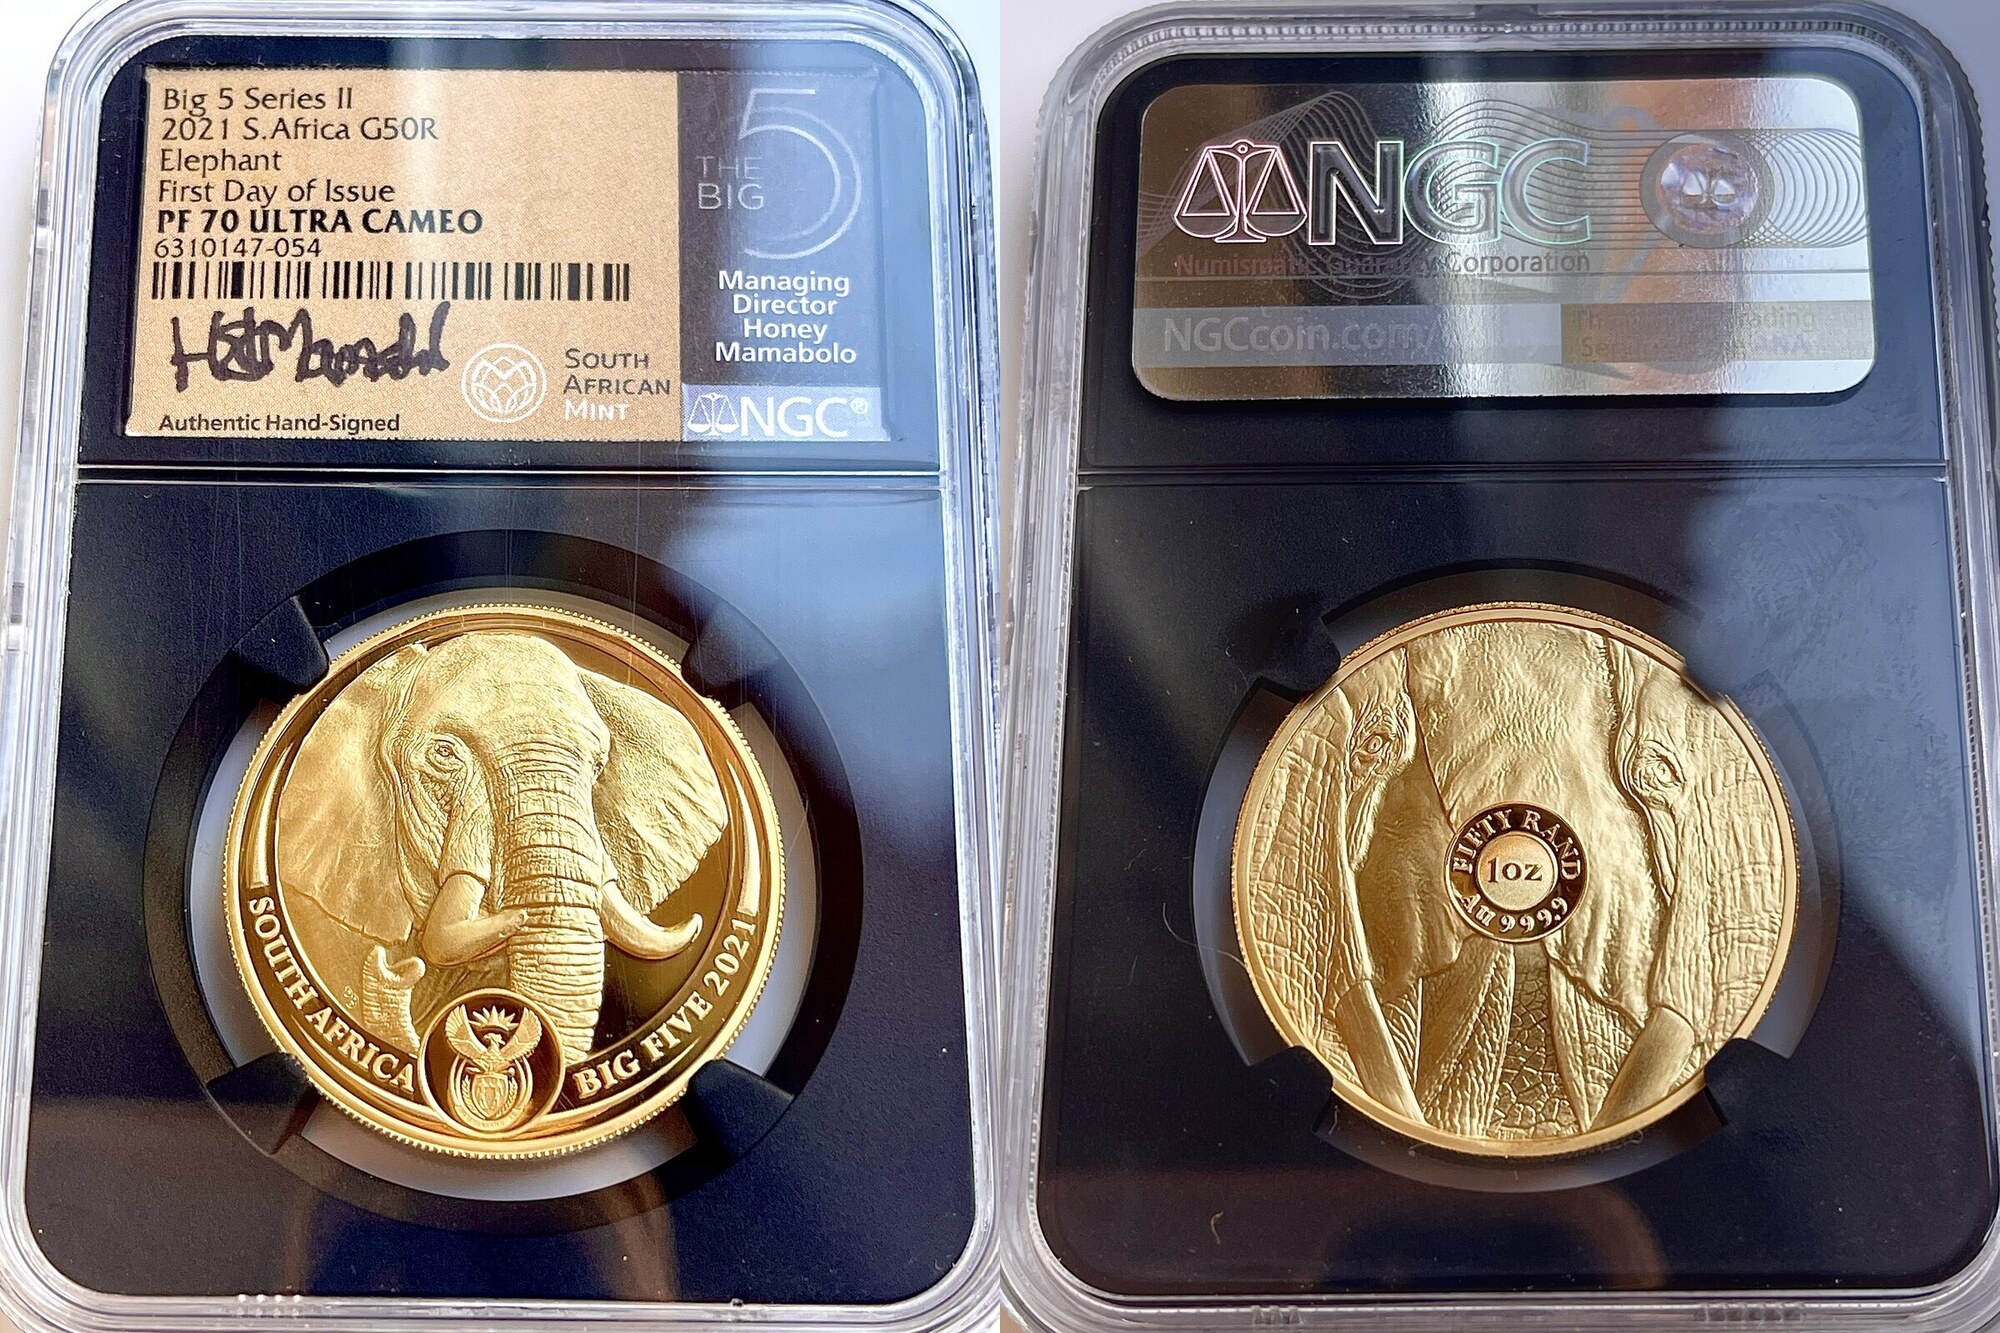 1oz South African Gold "Big Five Series" Elephant Coin 2022.